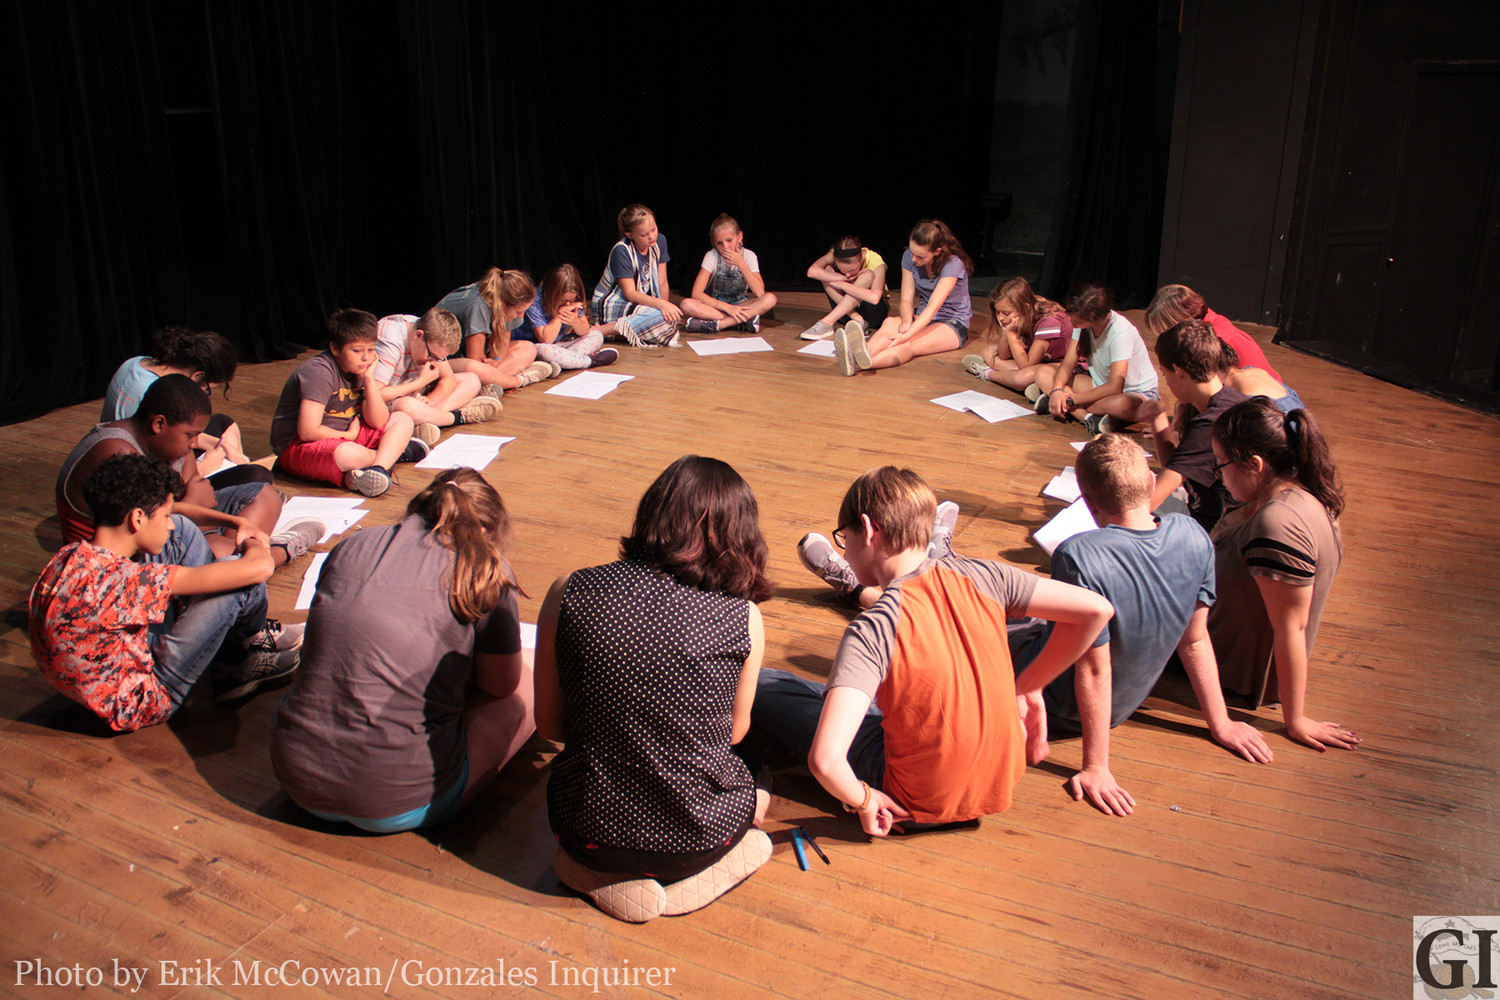 Campers gathered on stage to read lines from “Twelfth Night” in order to get a feel for what part they might want.